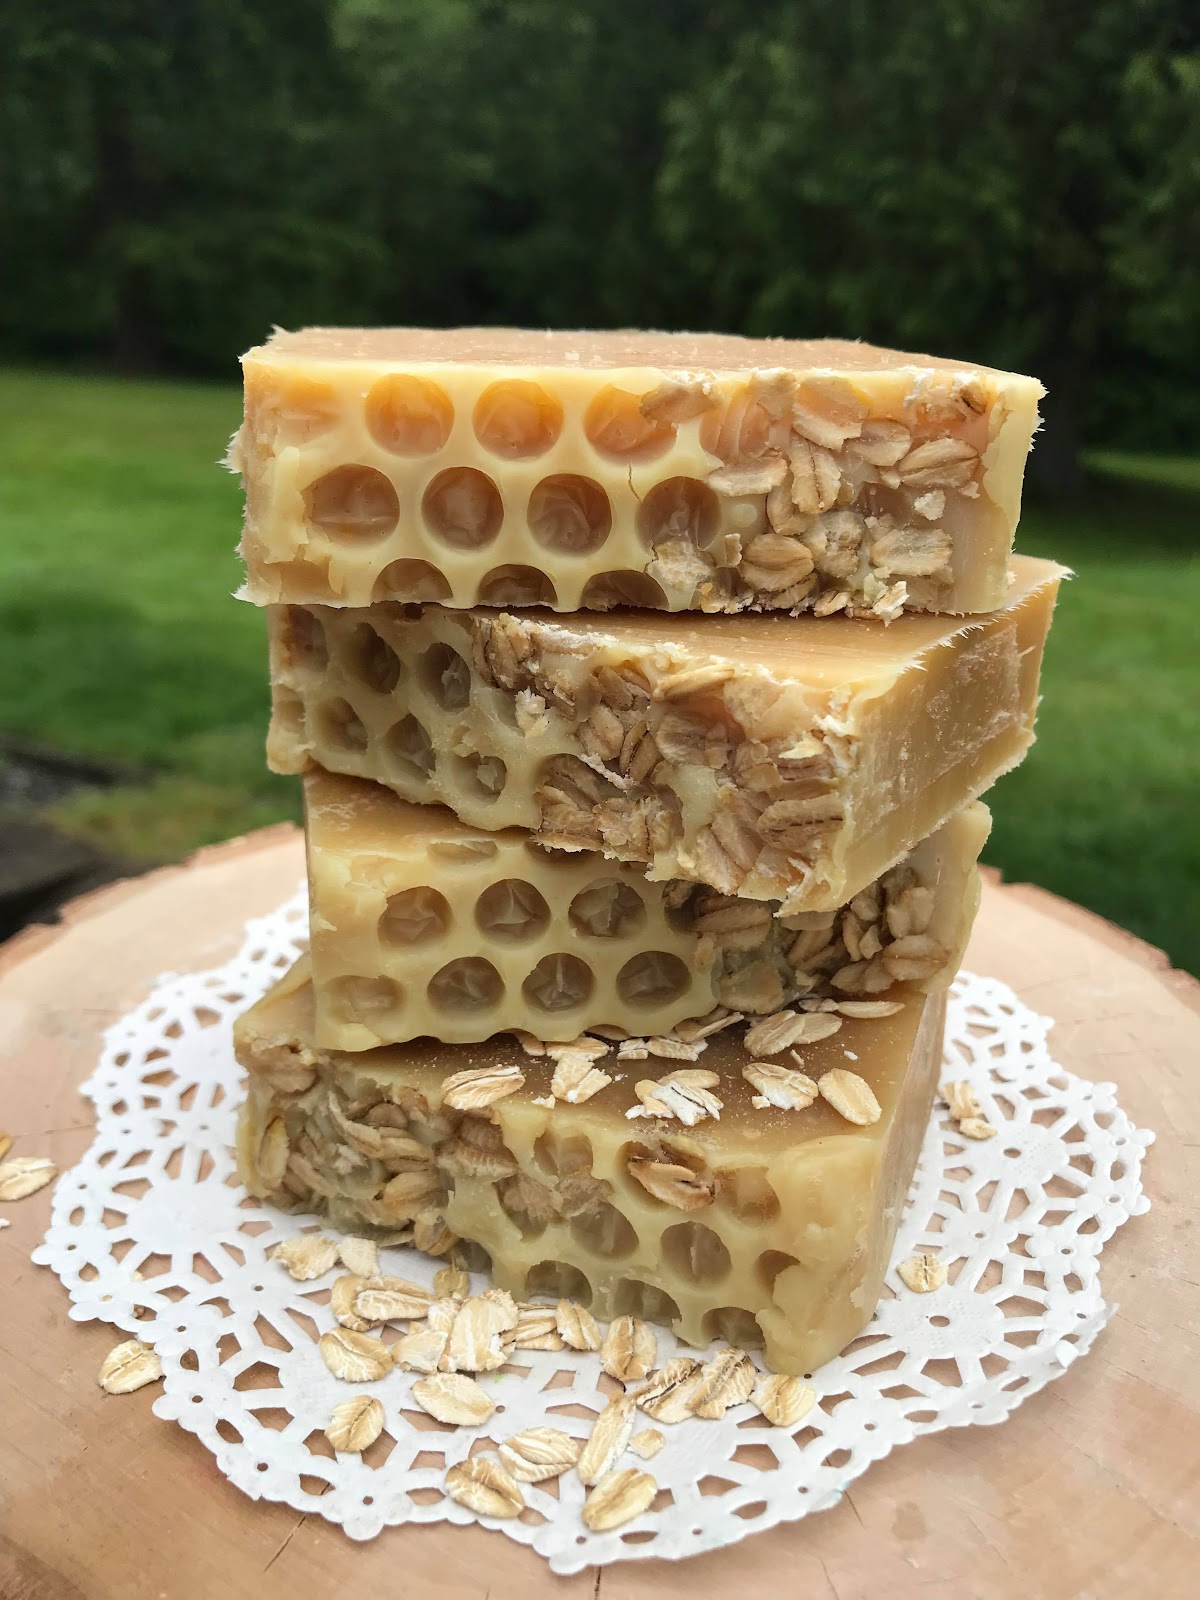 oatmeal soap from Catalina's Cottage.